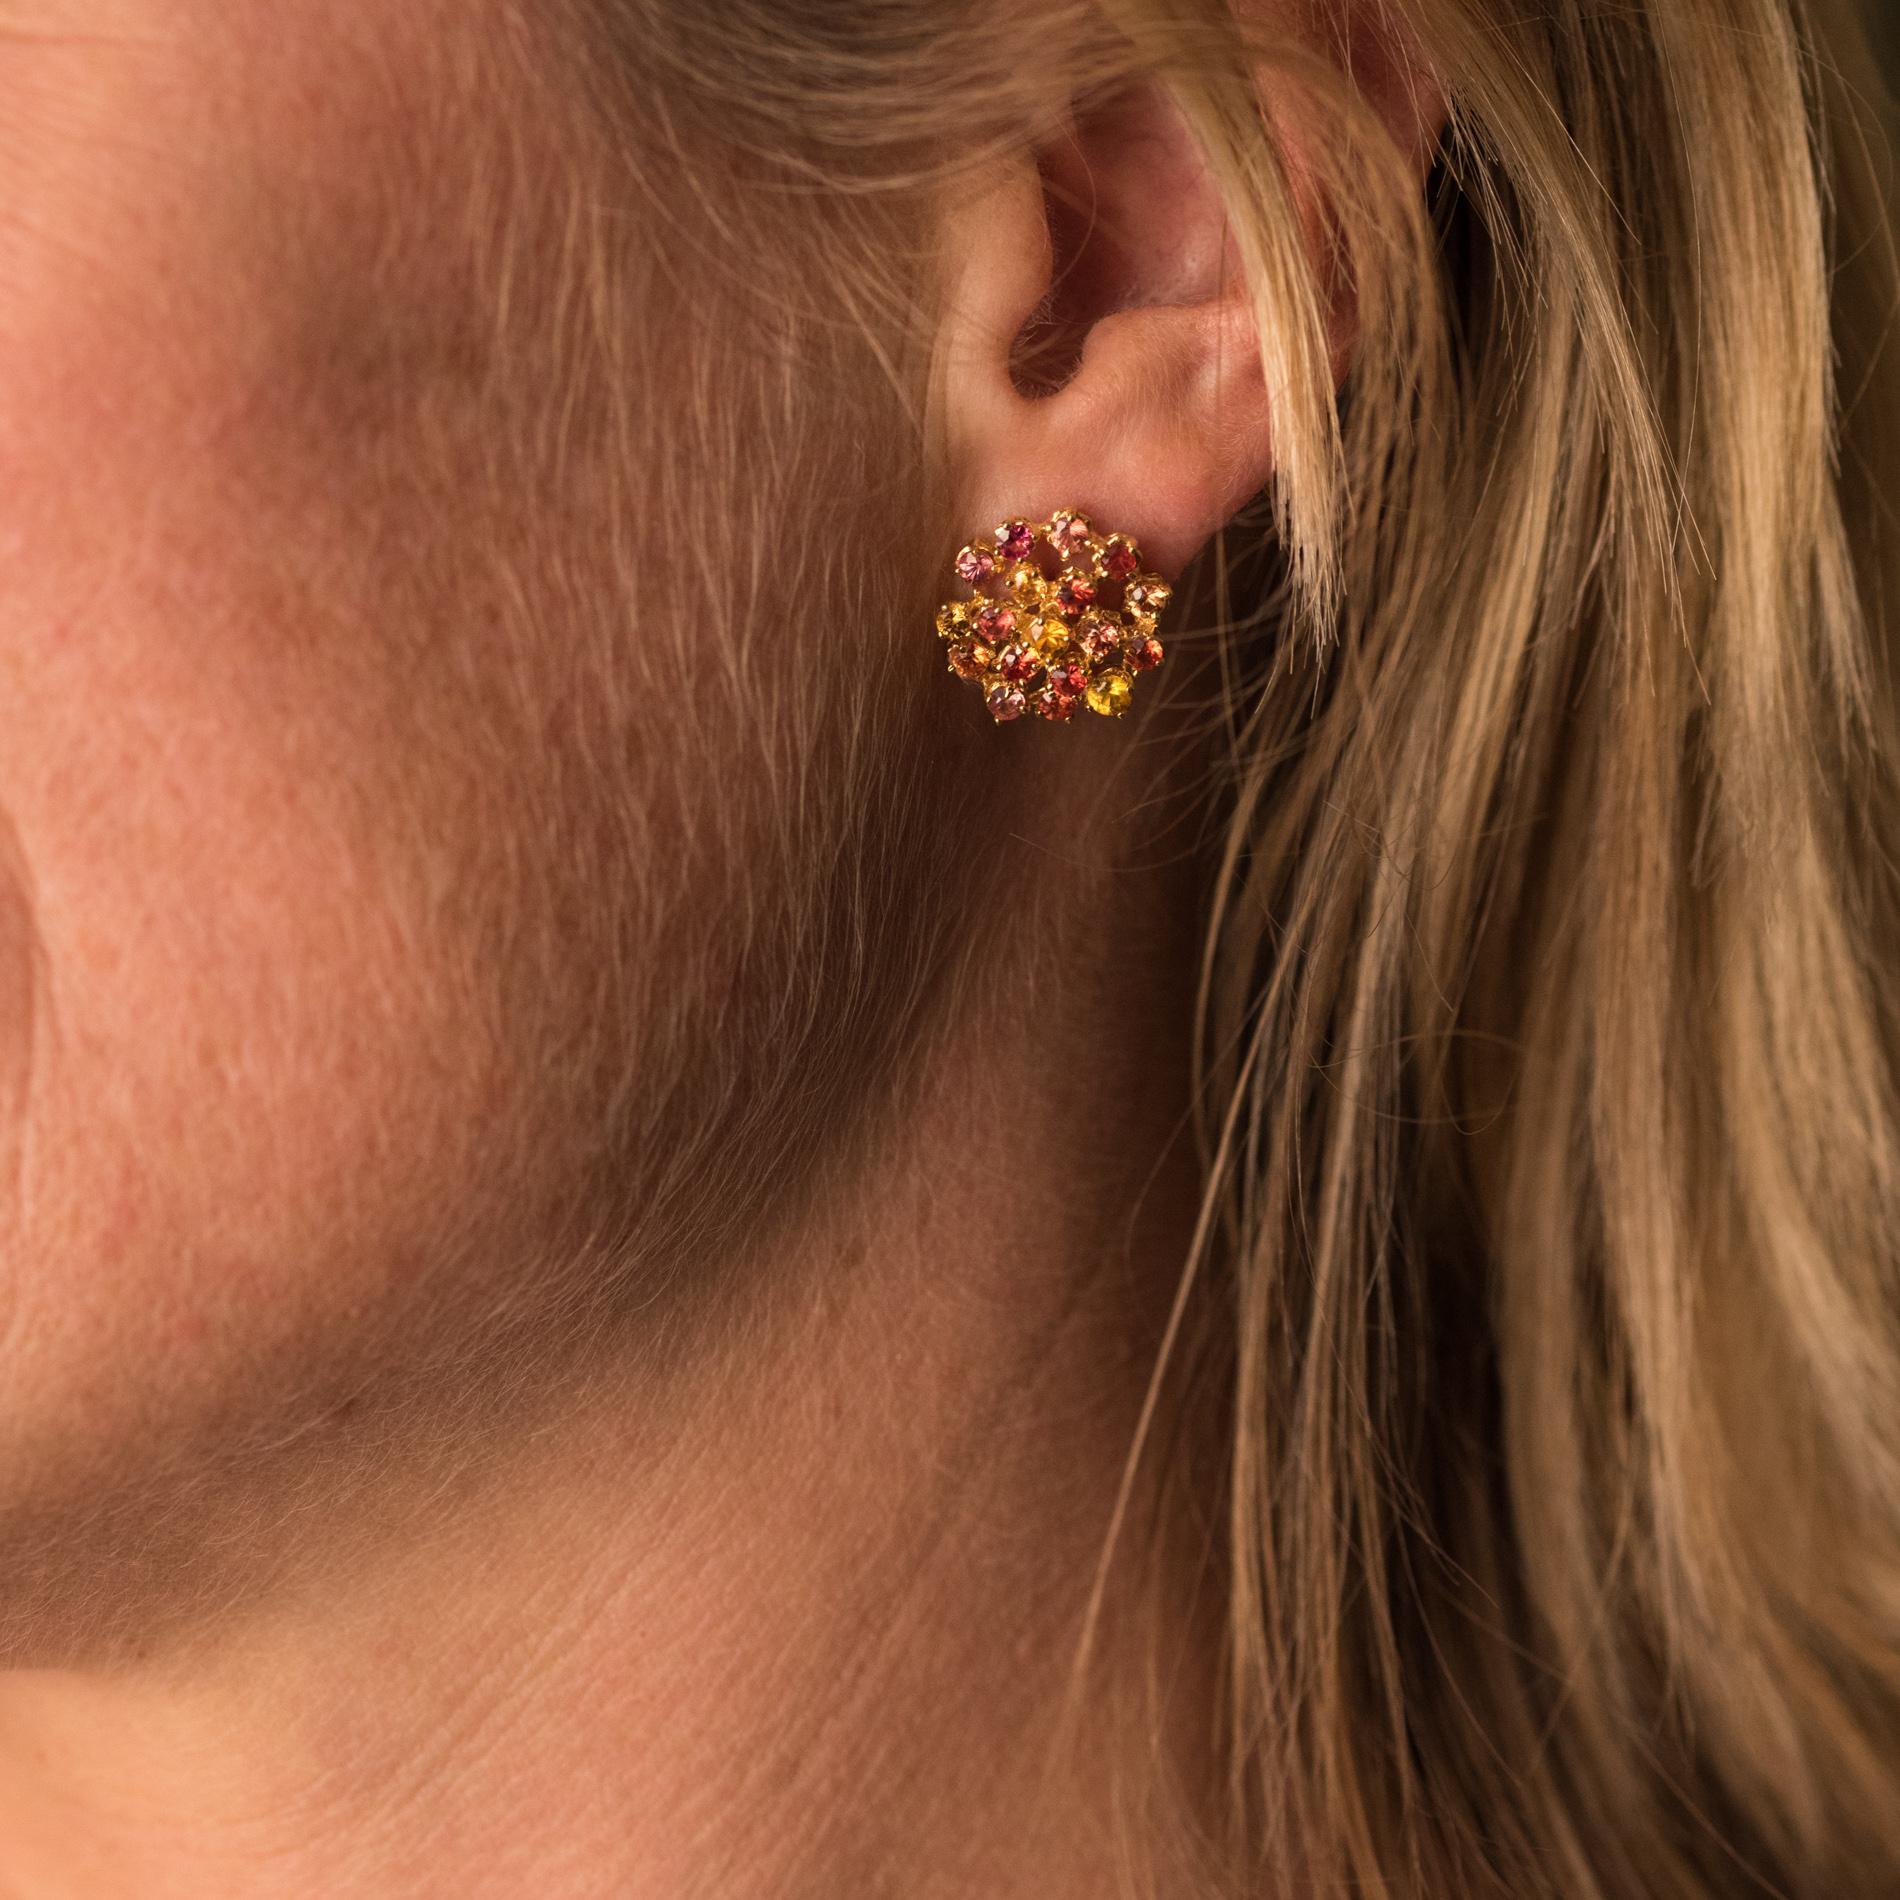 Earrings in yellow gold and silver, yellow gold rhodium plated.
These silver earrings are set in asymmetrical ways with a shades of yellow and orange sapphires. The stem is made with yellow gold and the clasp is a butterfly.
Total weight of